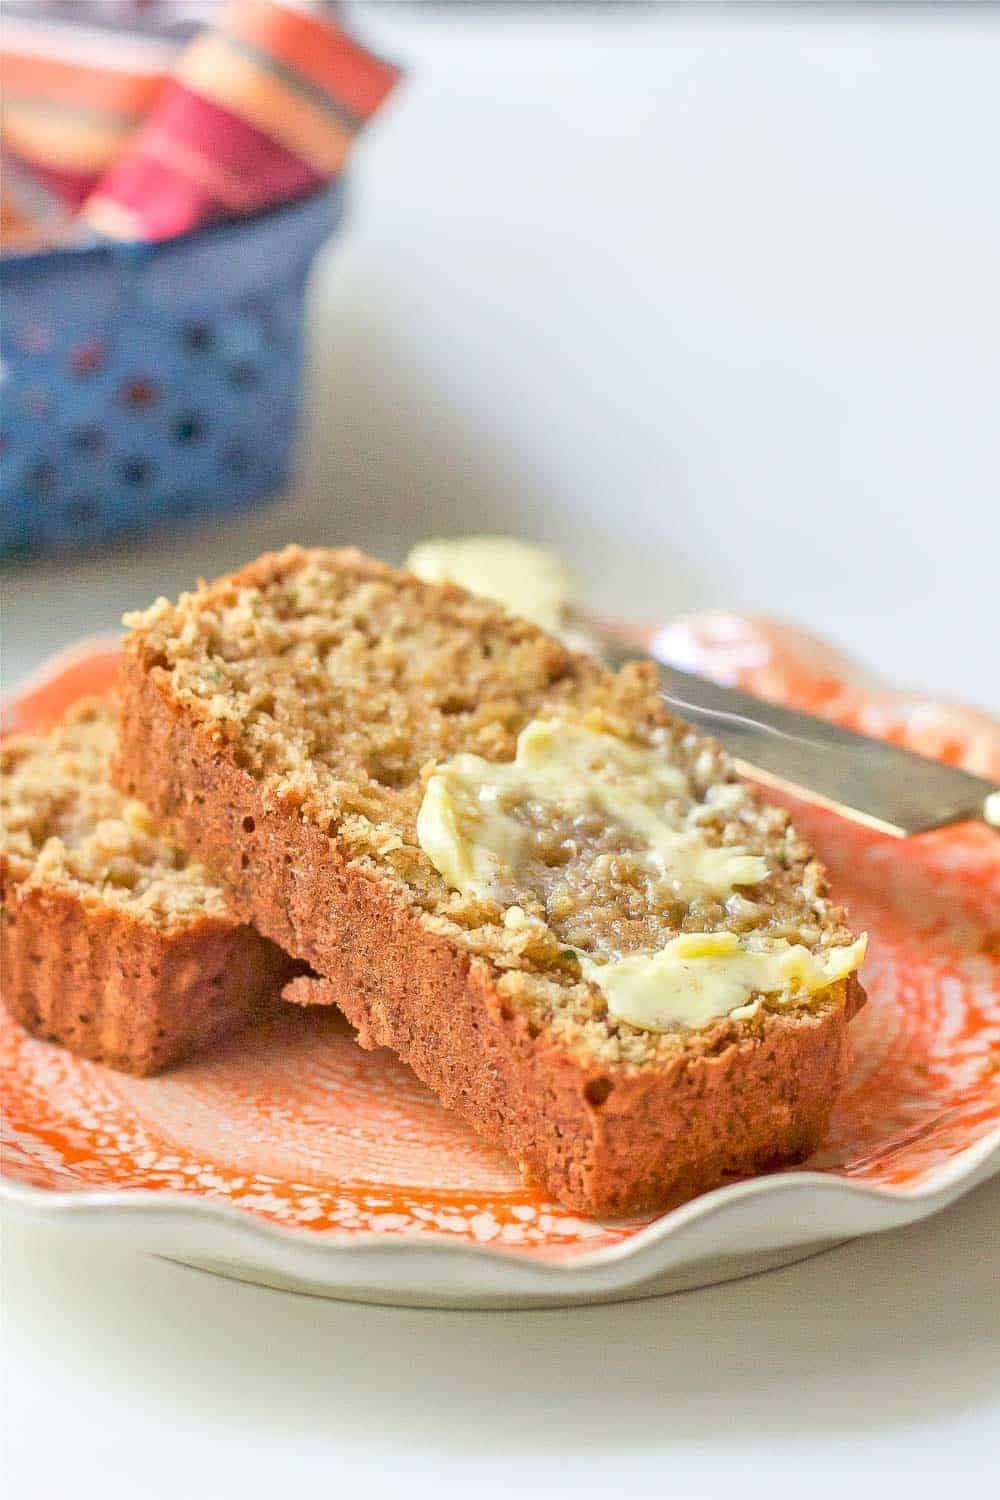 Classic zucchini bread is a summertime must! Make two loaves to freeze one for later.